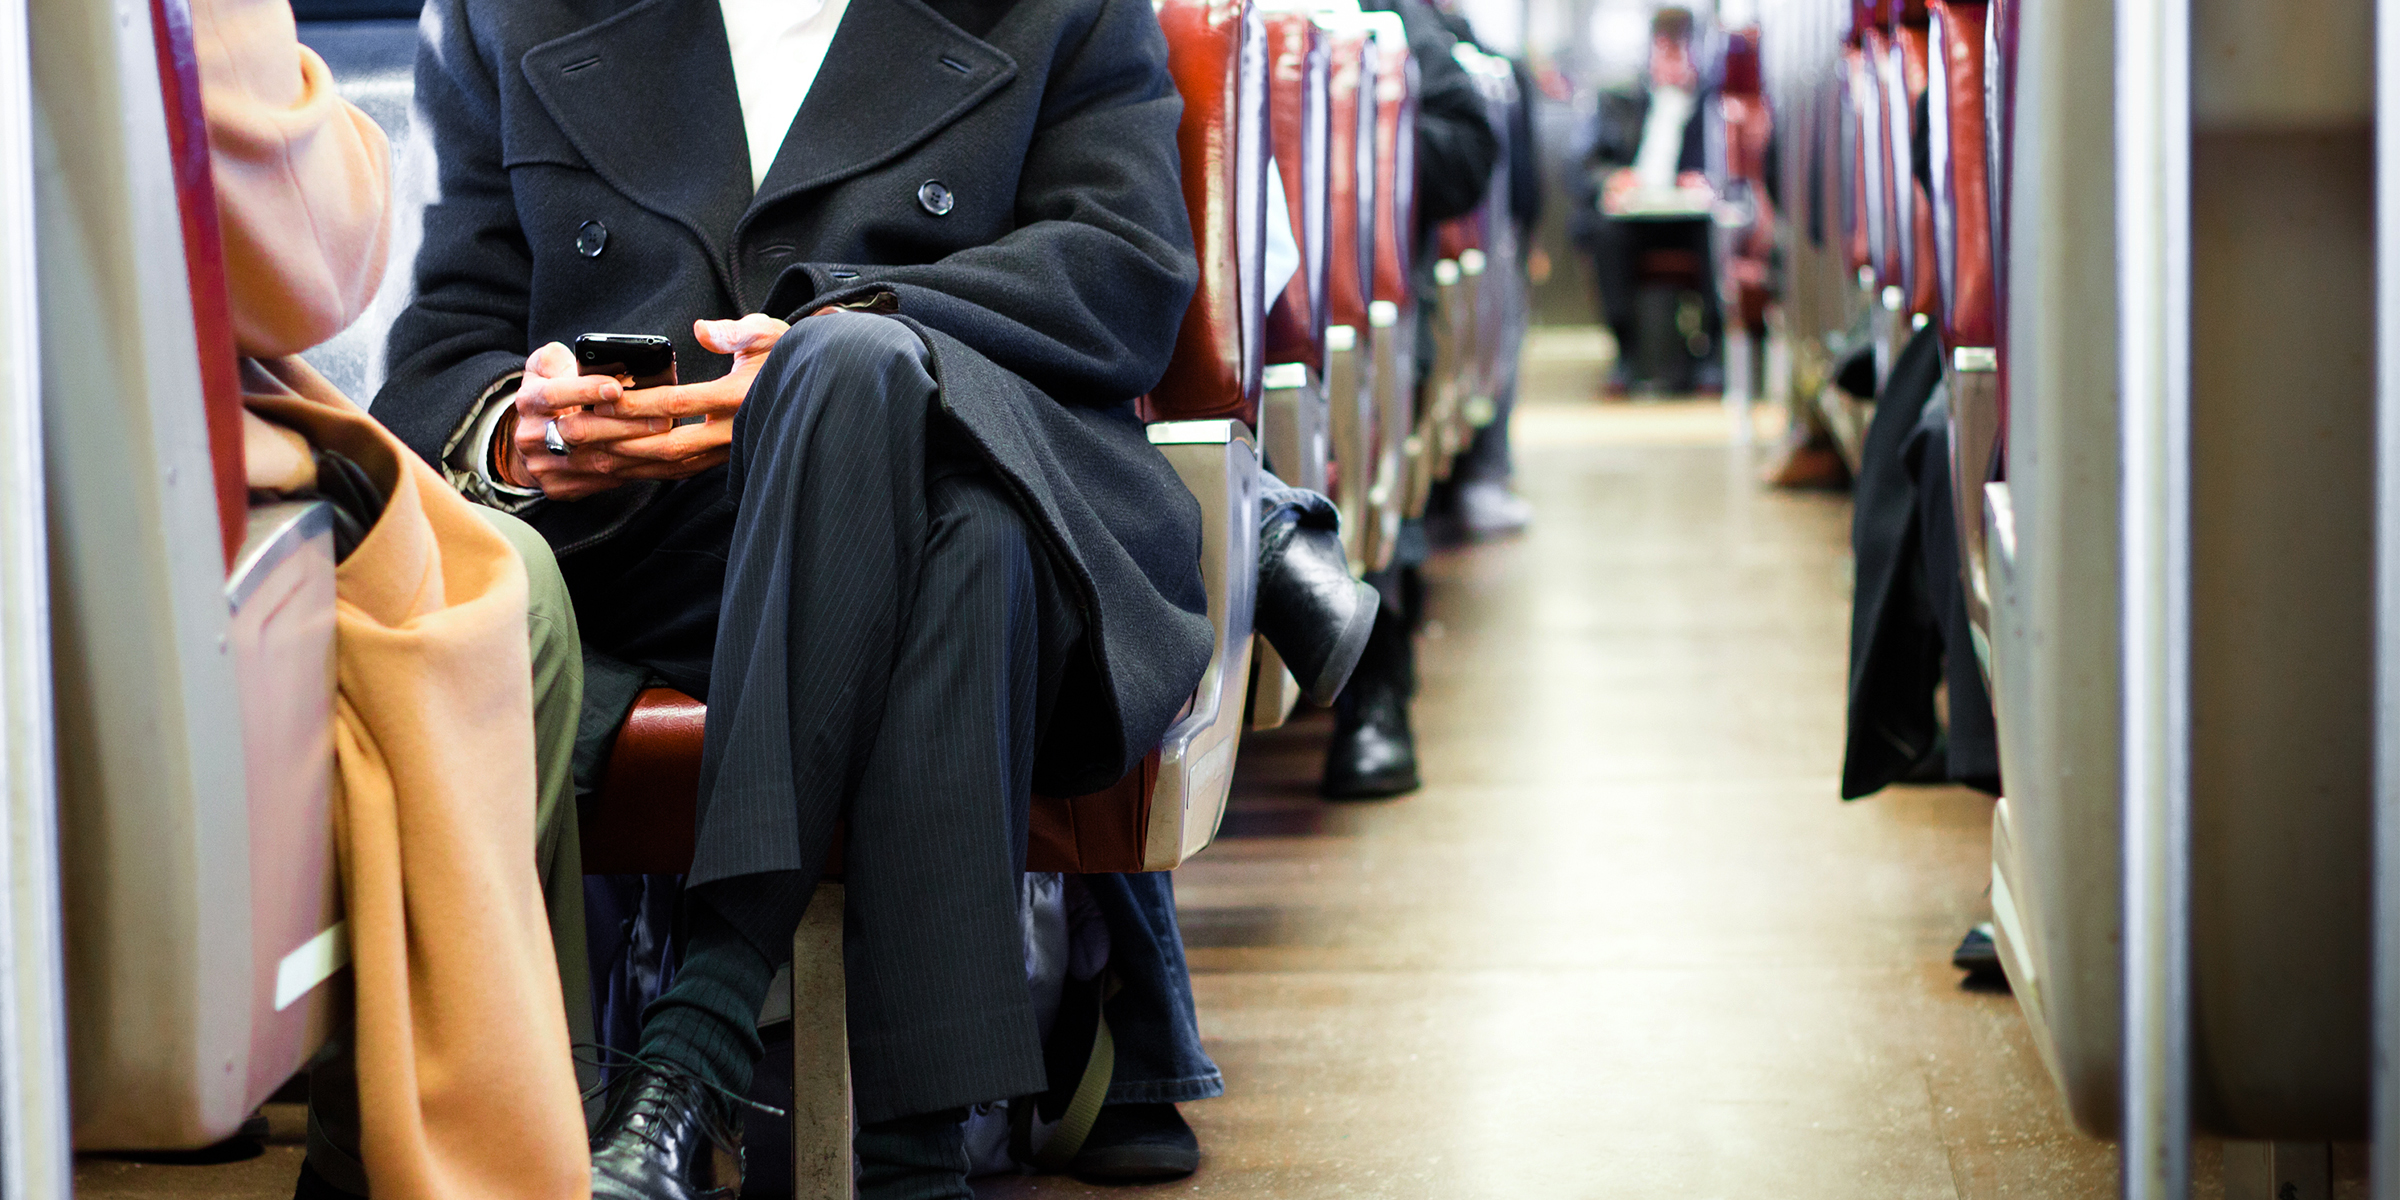 A man in a suit sitting on a busy train | Source: Shutterstock